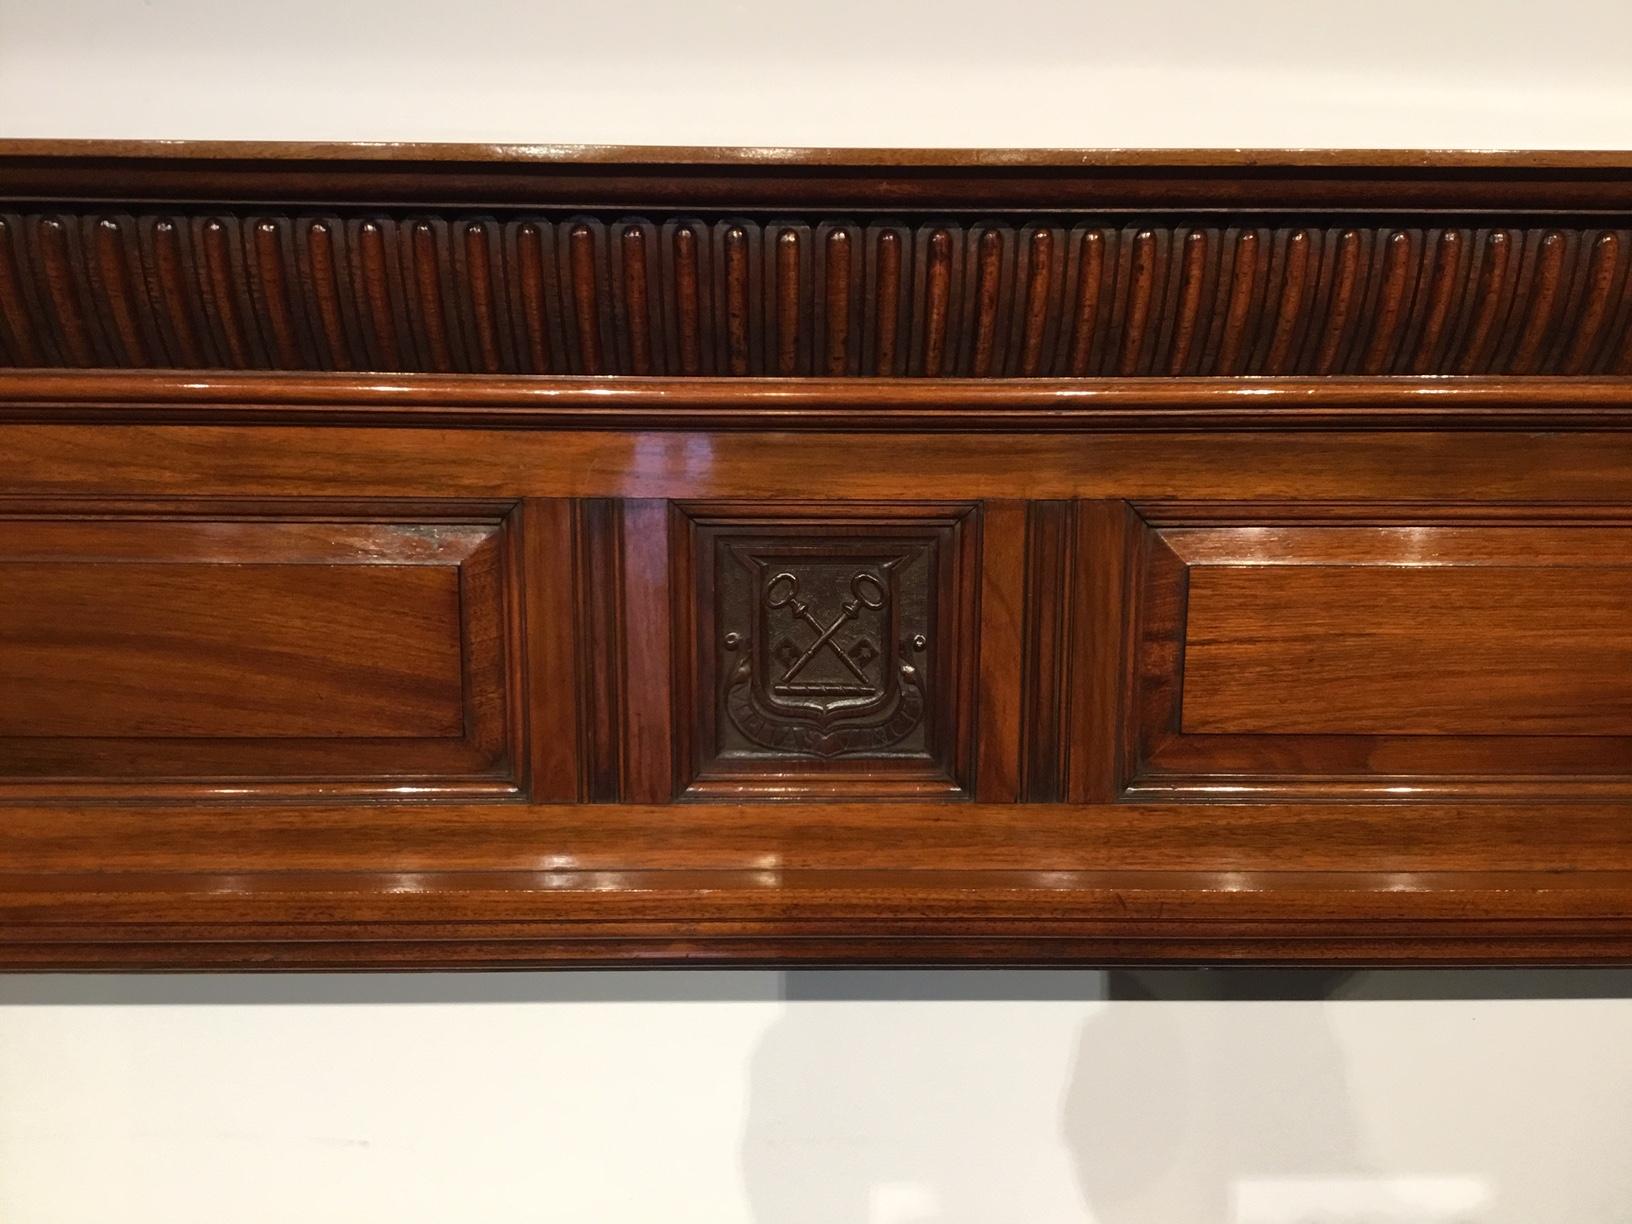 A walnut late Victorian period antique fire surround. The solid walnut top with a gadrooned and carved frieze above the central rectangular paneled section, having a finely carved coat of arms with a Latin inscription and cross keys motif. The